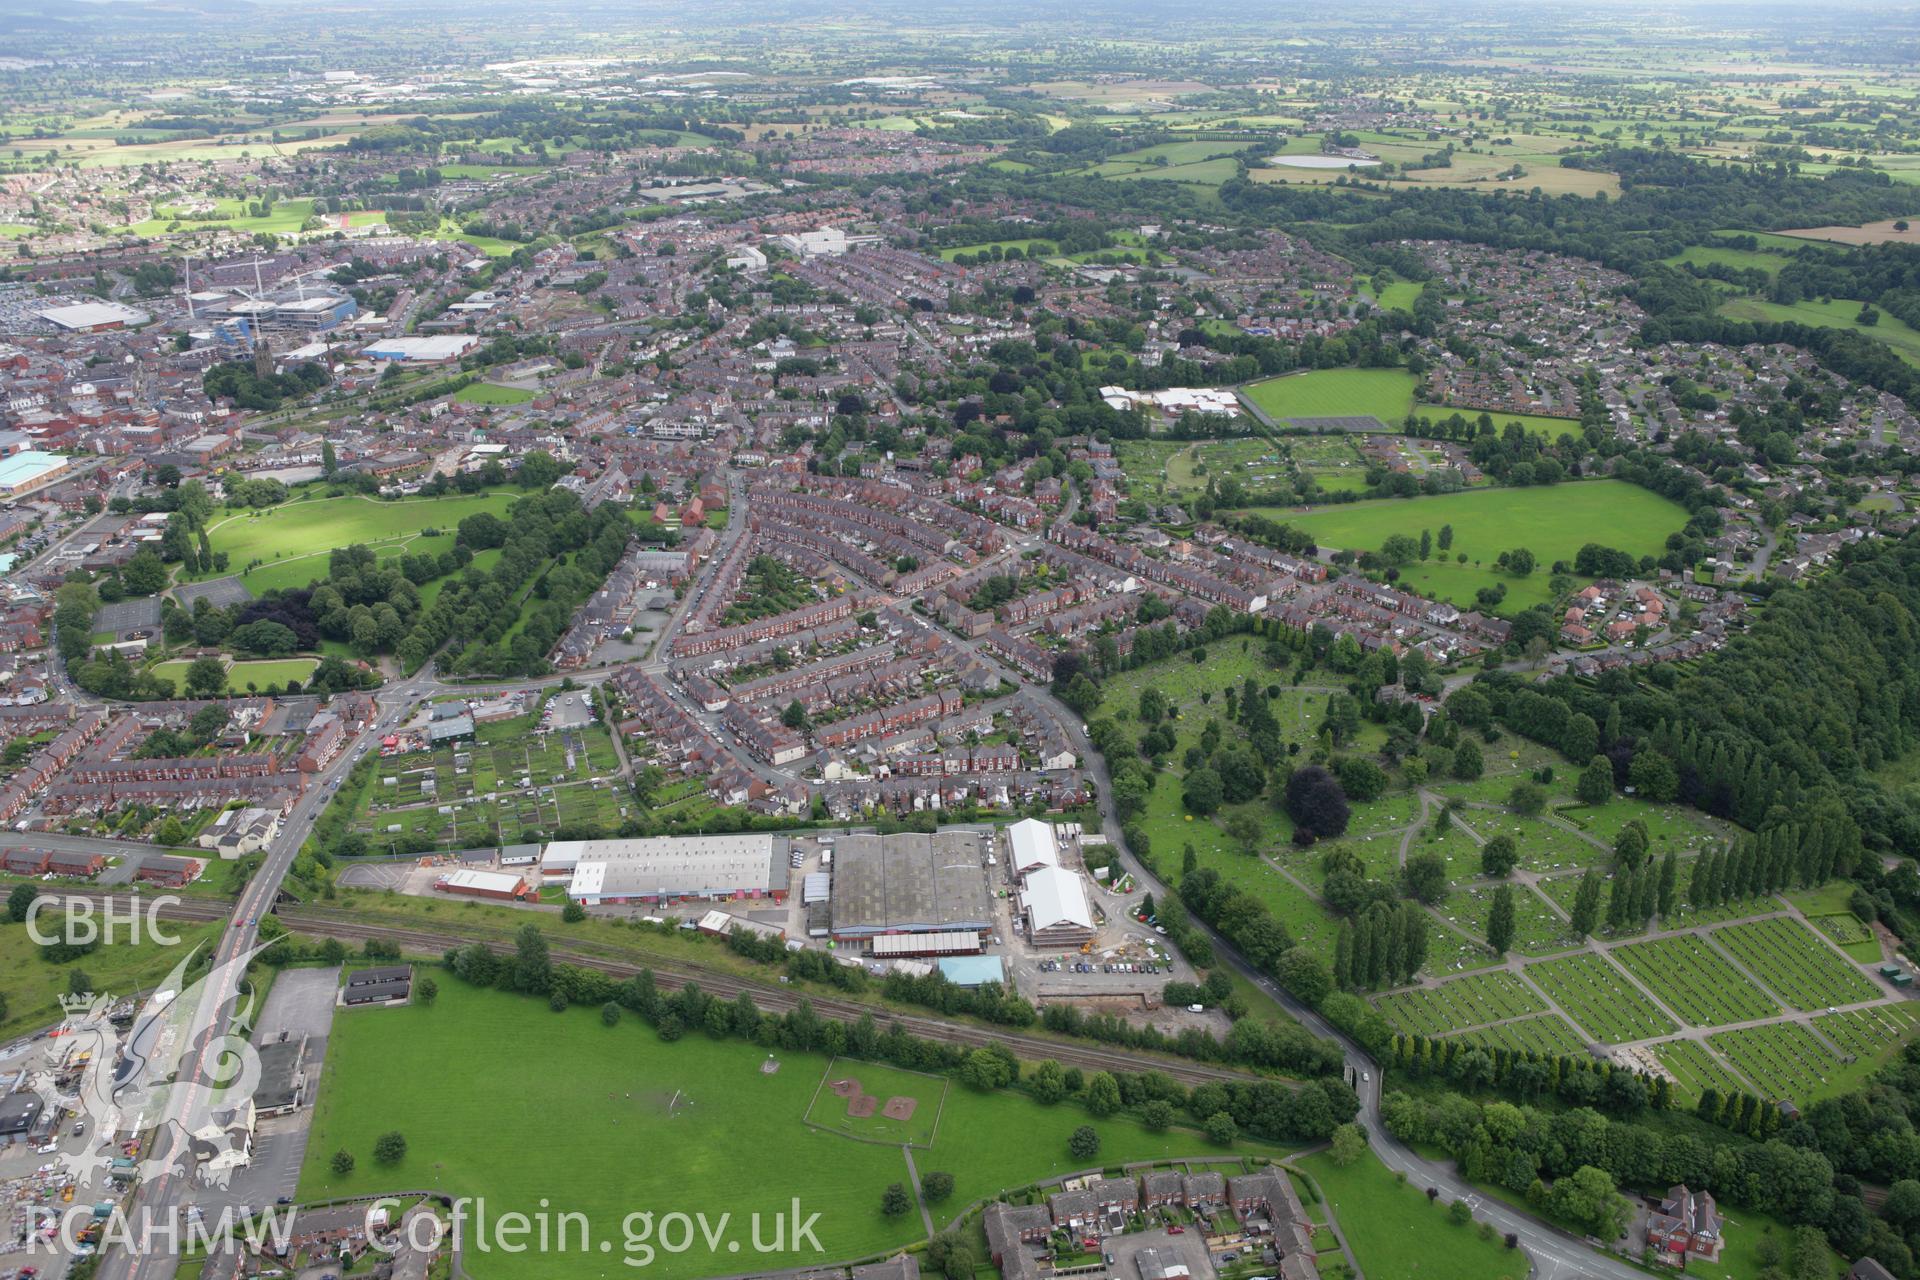 RCAHMW colour oblique aerial photograph of Wrexham showing housing in the southern part of the town. Taken on 24 July 2007 by Toby Driver